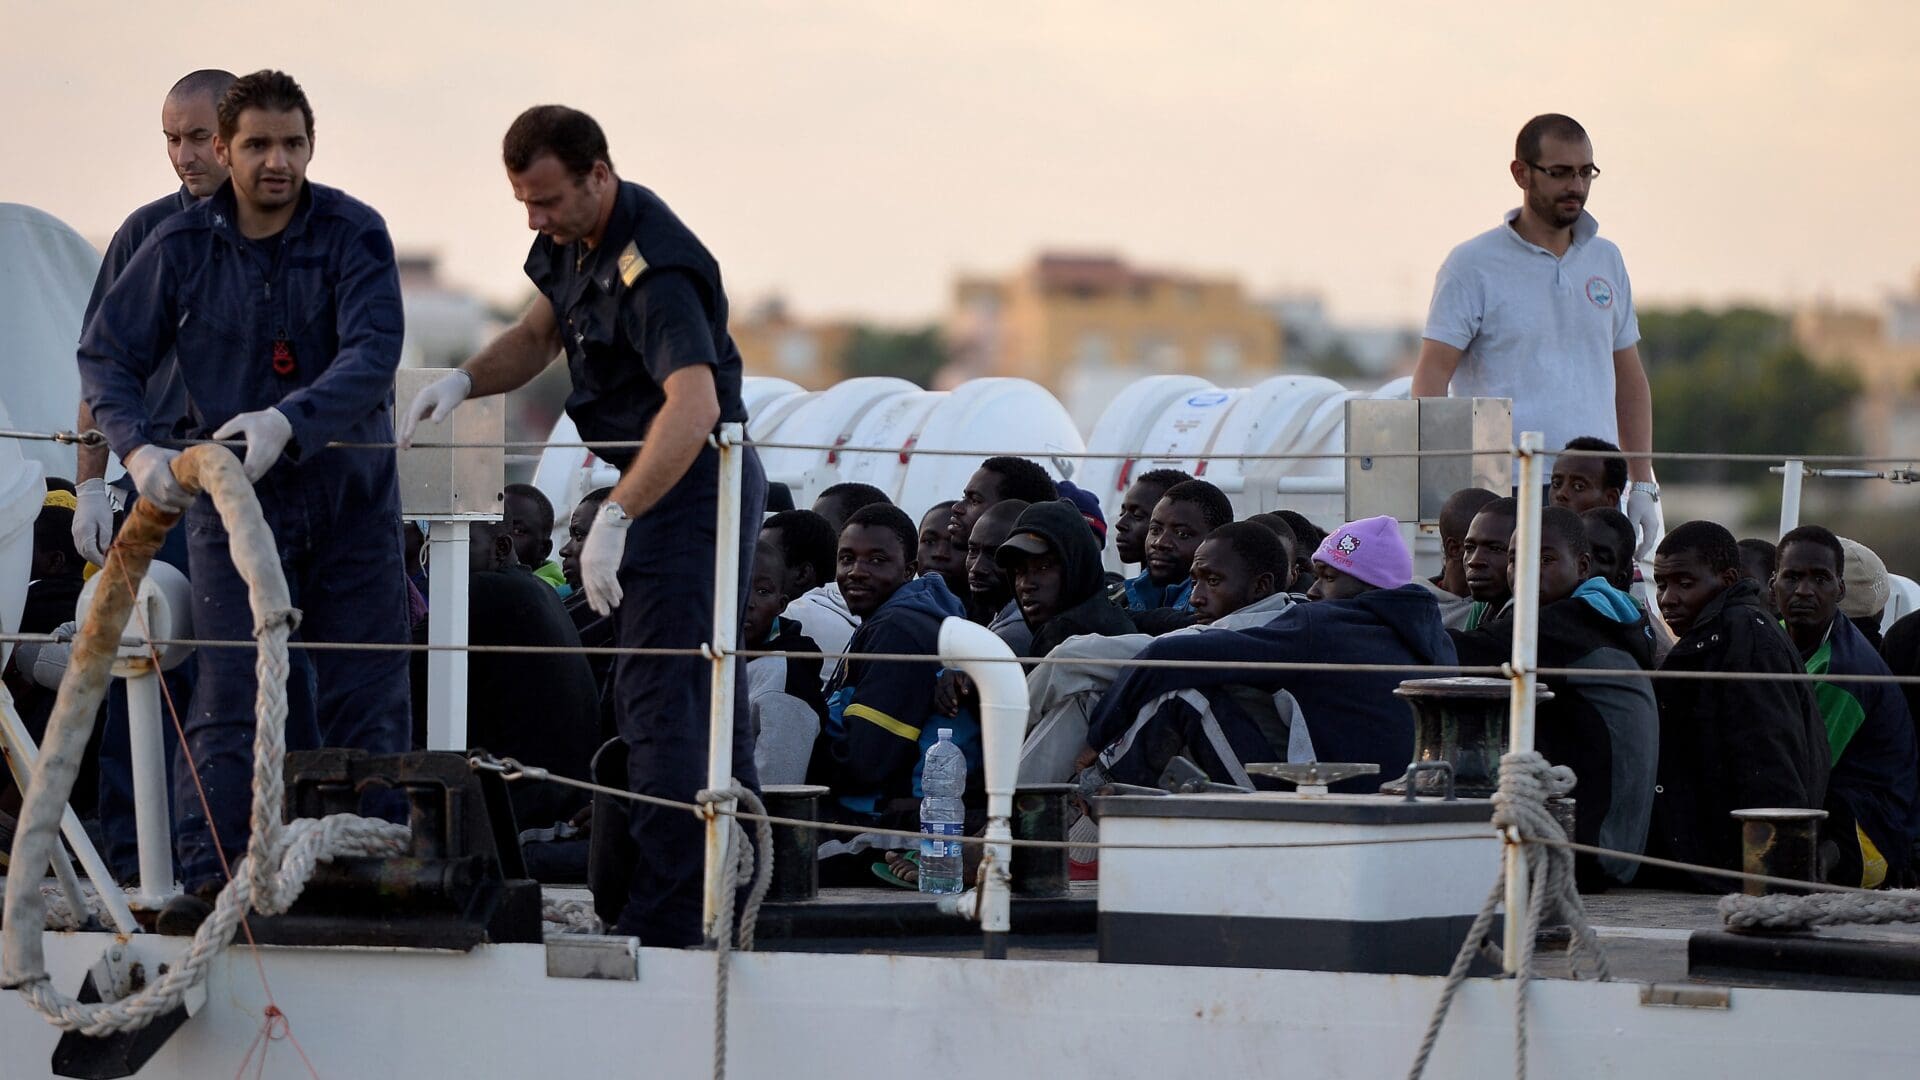 Some 100 migrants sit on the Guardia Costiera boat after being rescued off the shores of the island of Lampedusa on 25 October 2013 as part of the Italian Navy’s Mare Nostrum search-and-rescue operation launched after more than 400 migrants drowned in two disasters earlier that month.